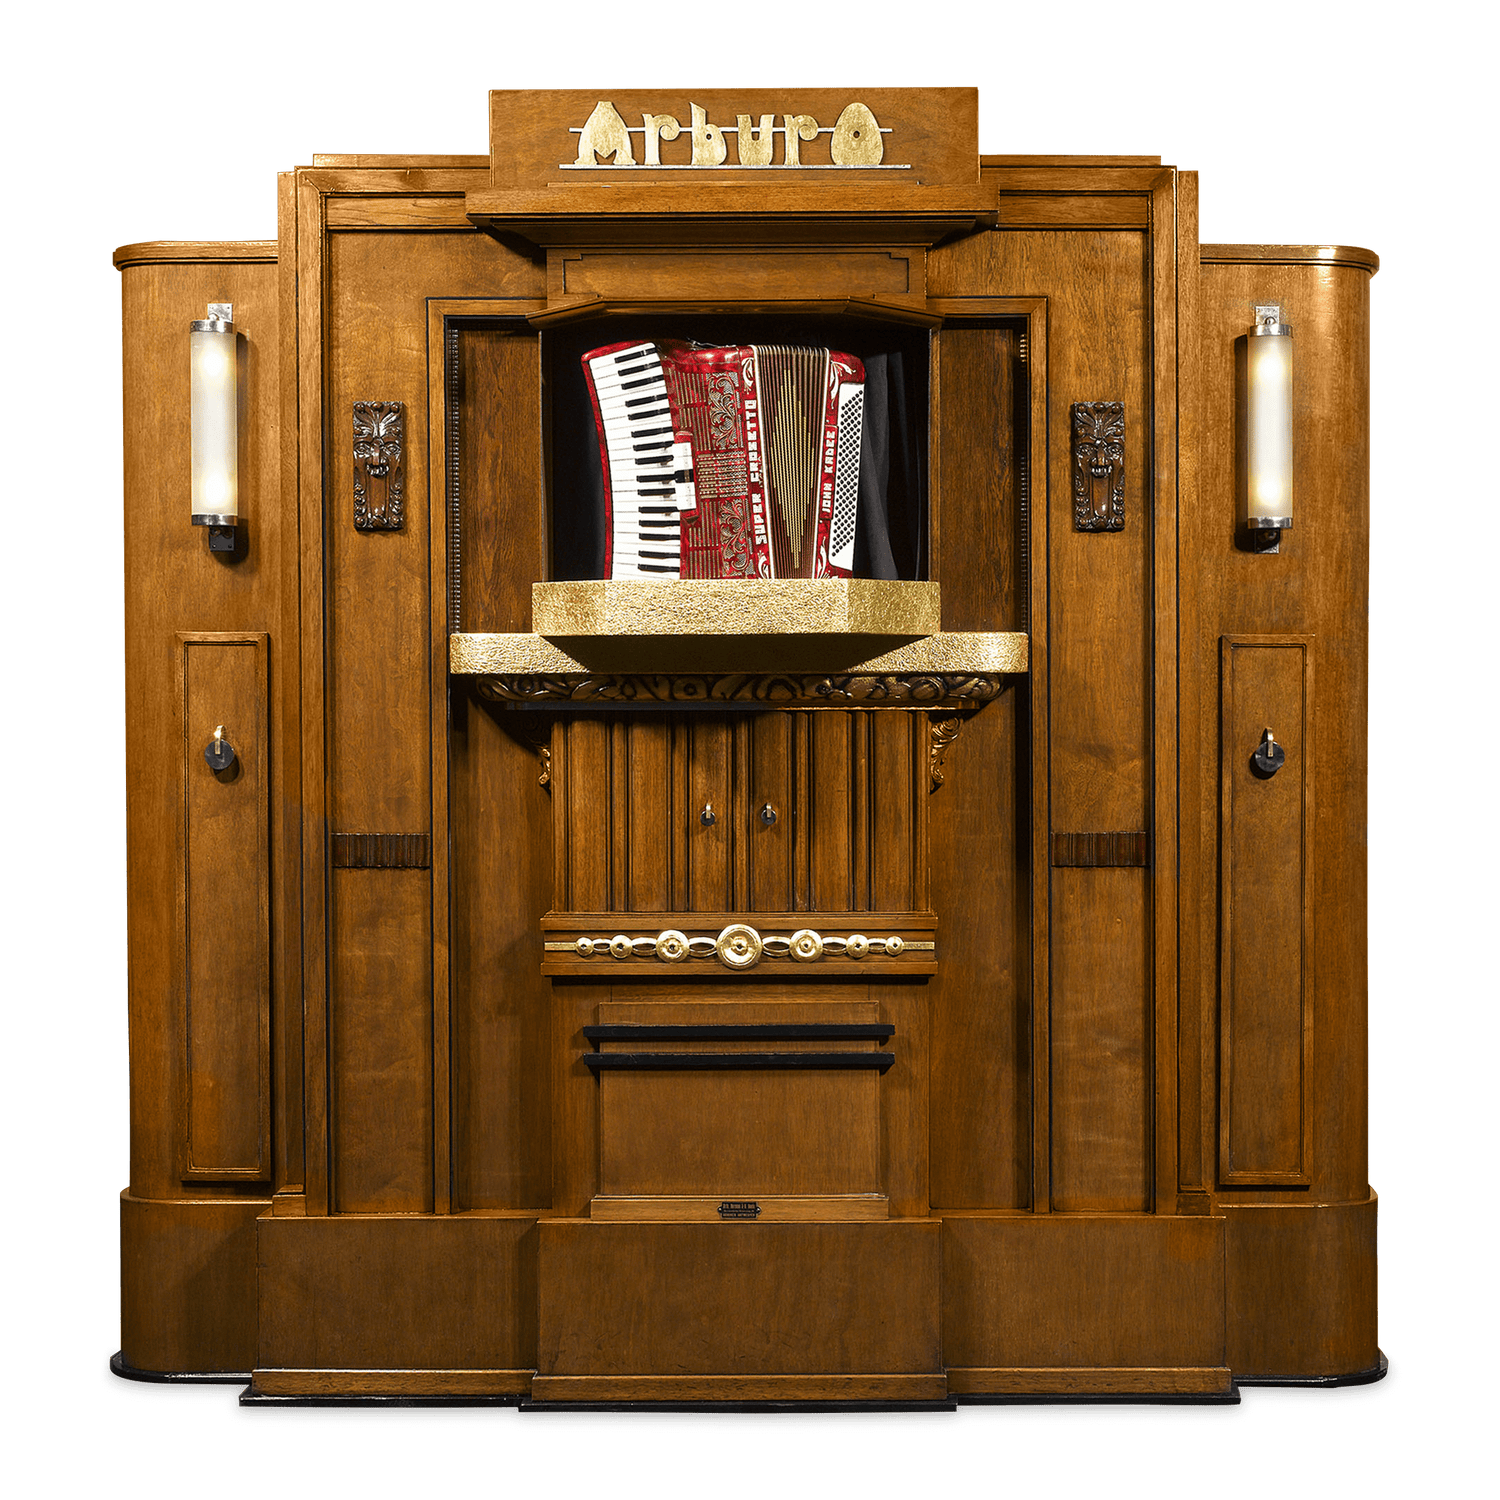 A rare and early Arburo Orchestrion dance hall organ of exceptional quality and working condition